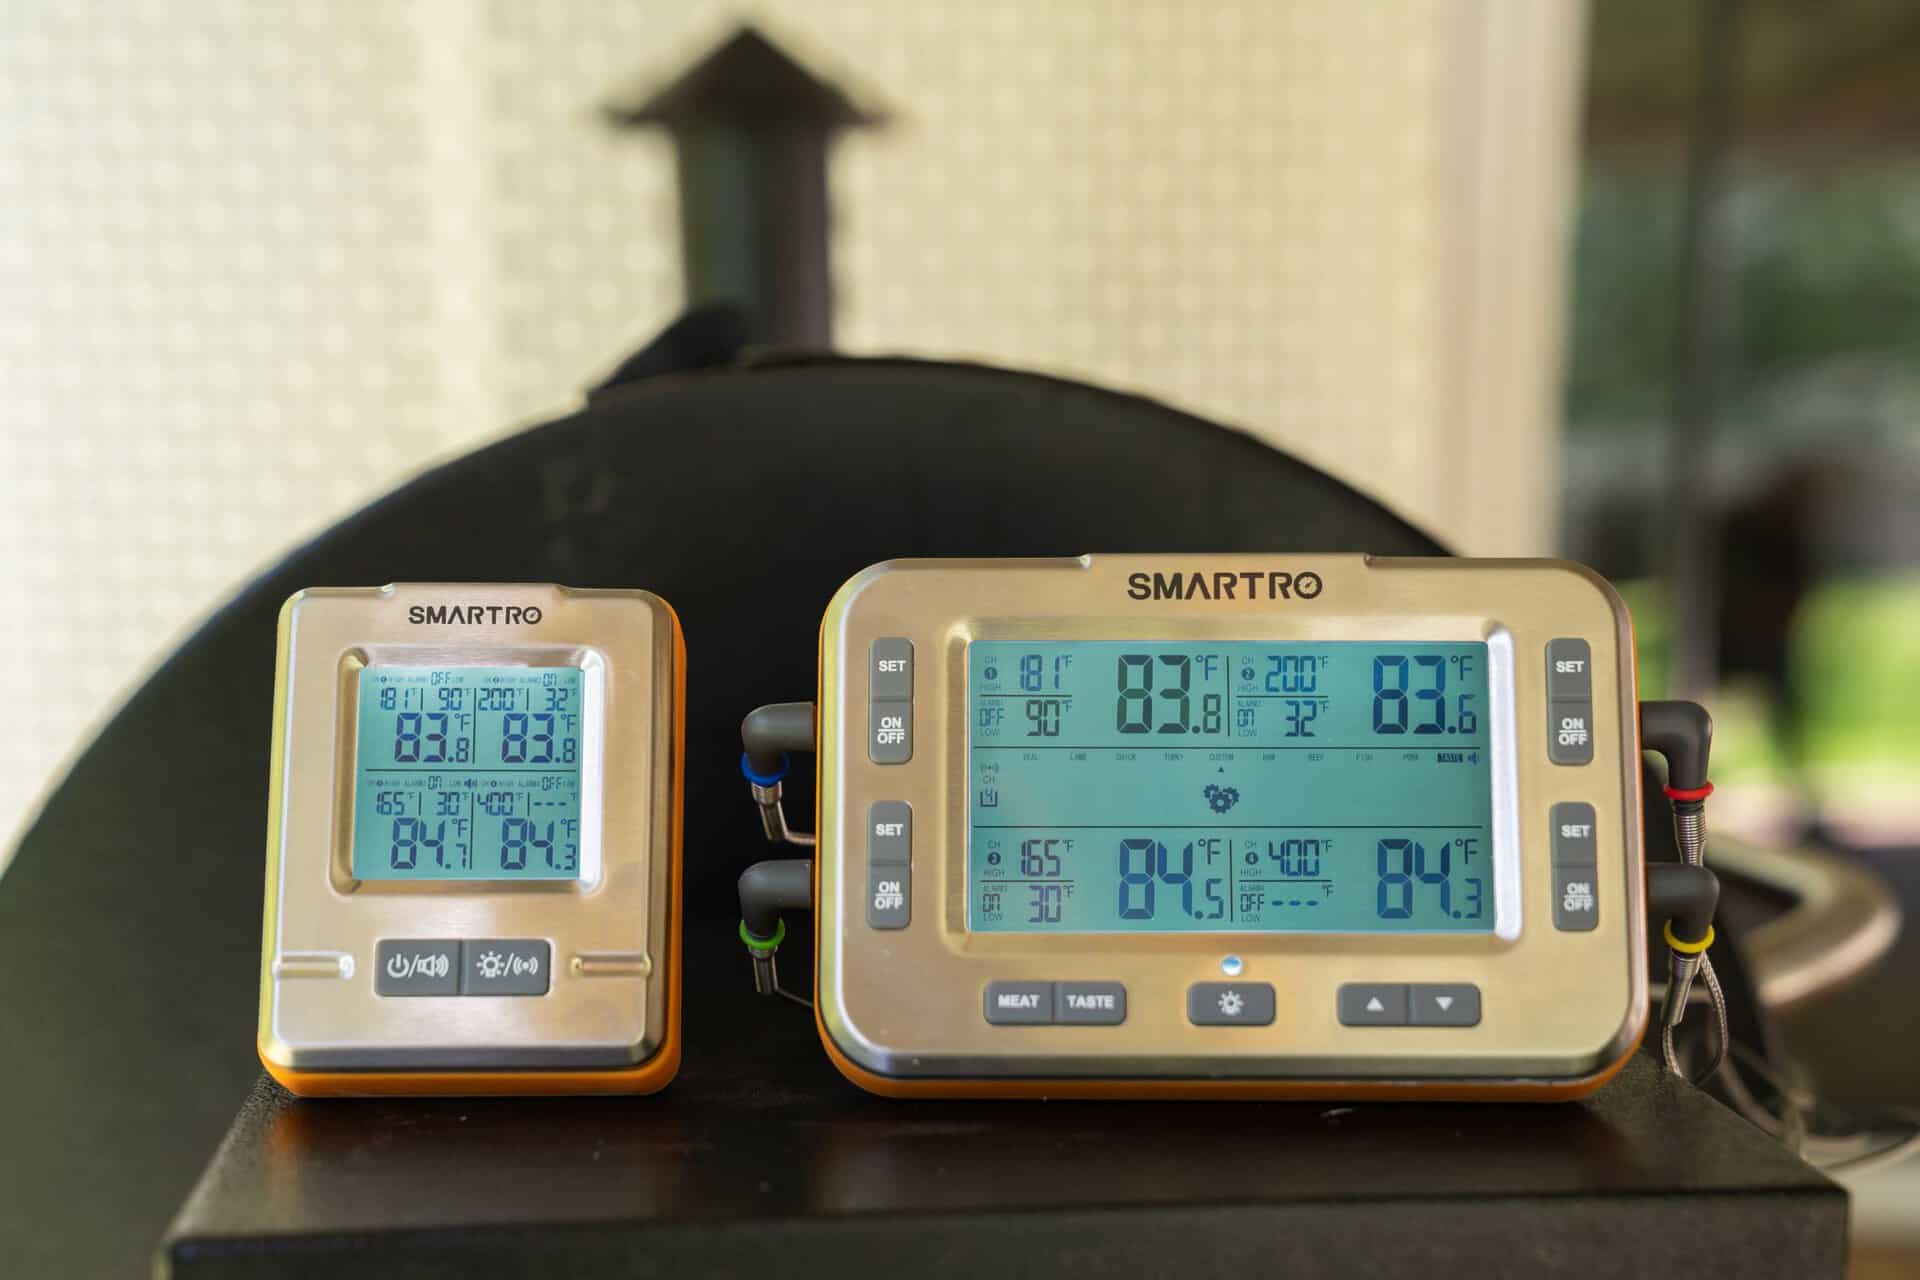 Benefits of a 500' Range for Wireless Thermometers, Meat Thermometer, Hygrometer